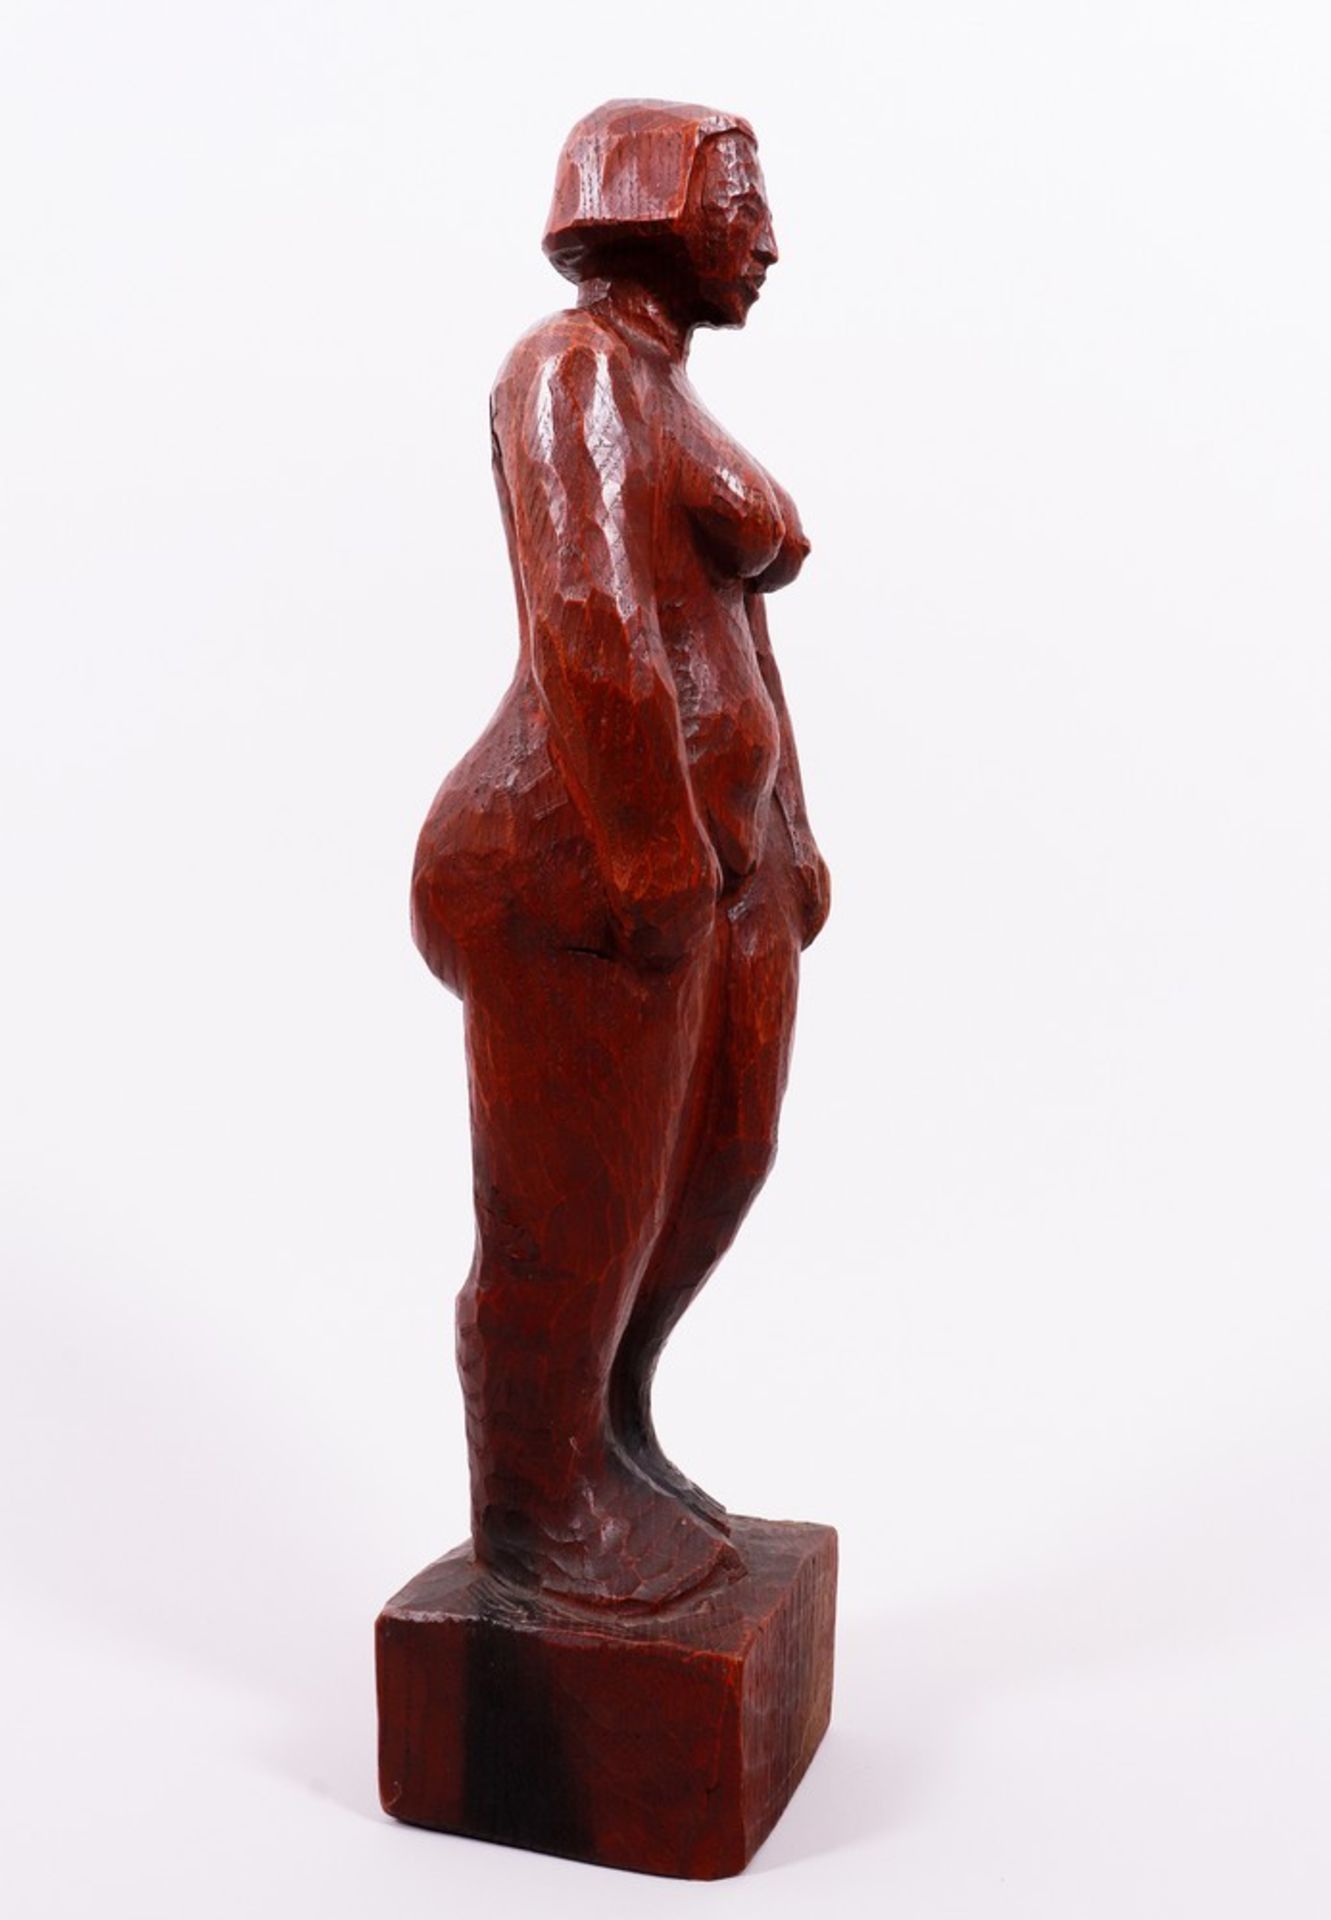 Standing female nude, probably Danish sculptor, c. 1940 - Image 4 of 7